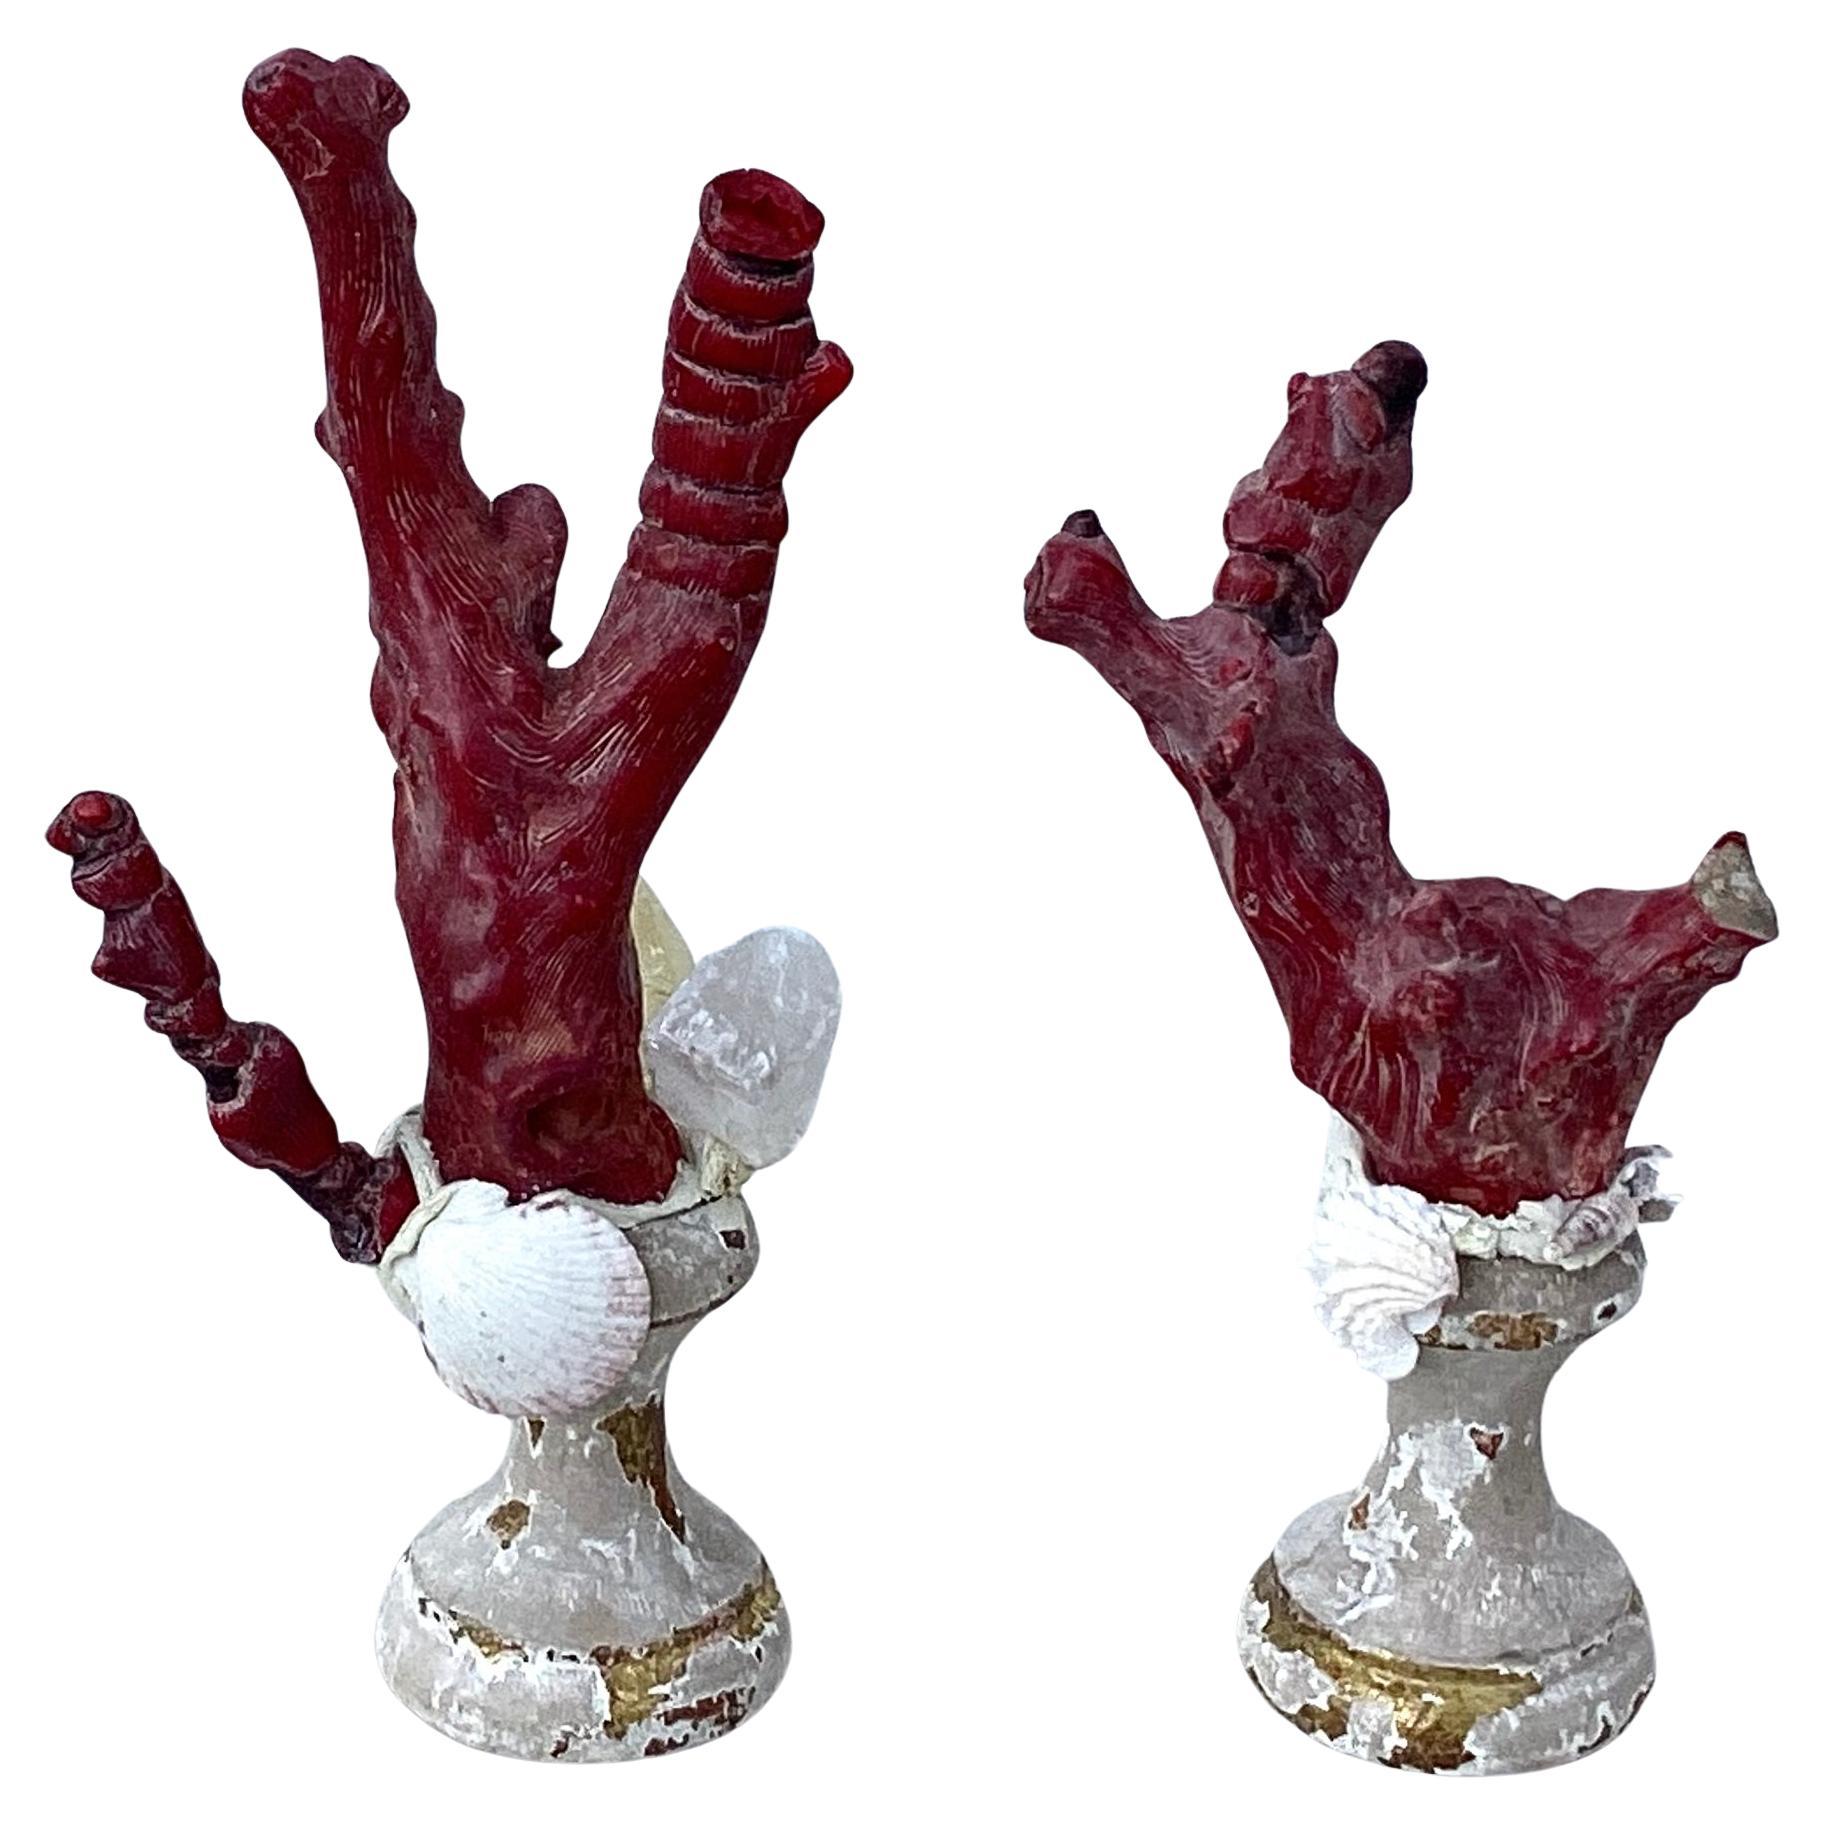 A pair of hand-crafted sculpture specimens of natural red coral branches mounted on a pair of 18th century wooden painted and gold gilt fragment bases. Smaller sculpture is 8.5